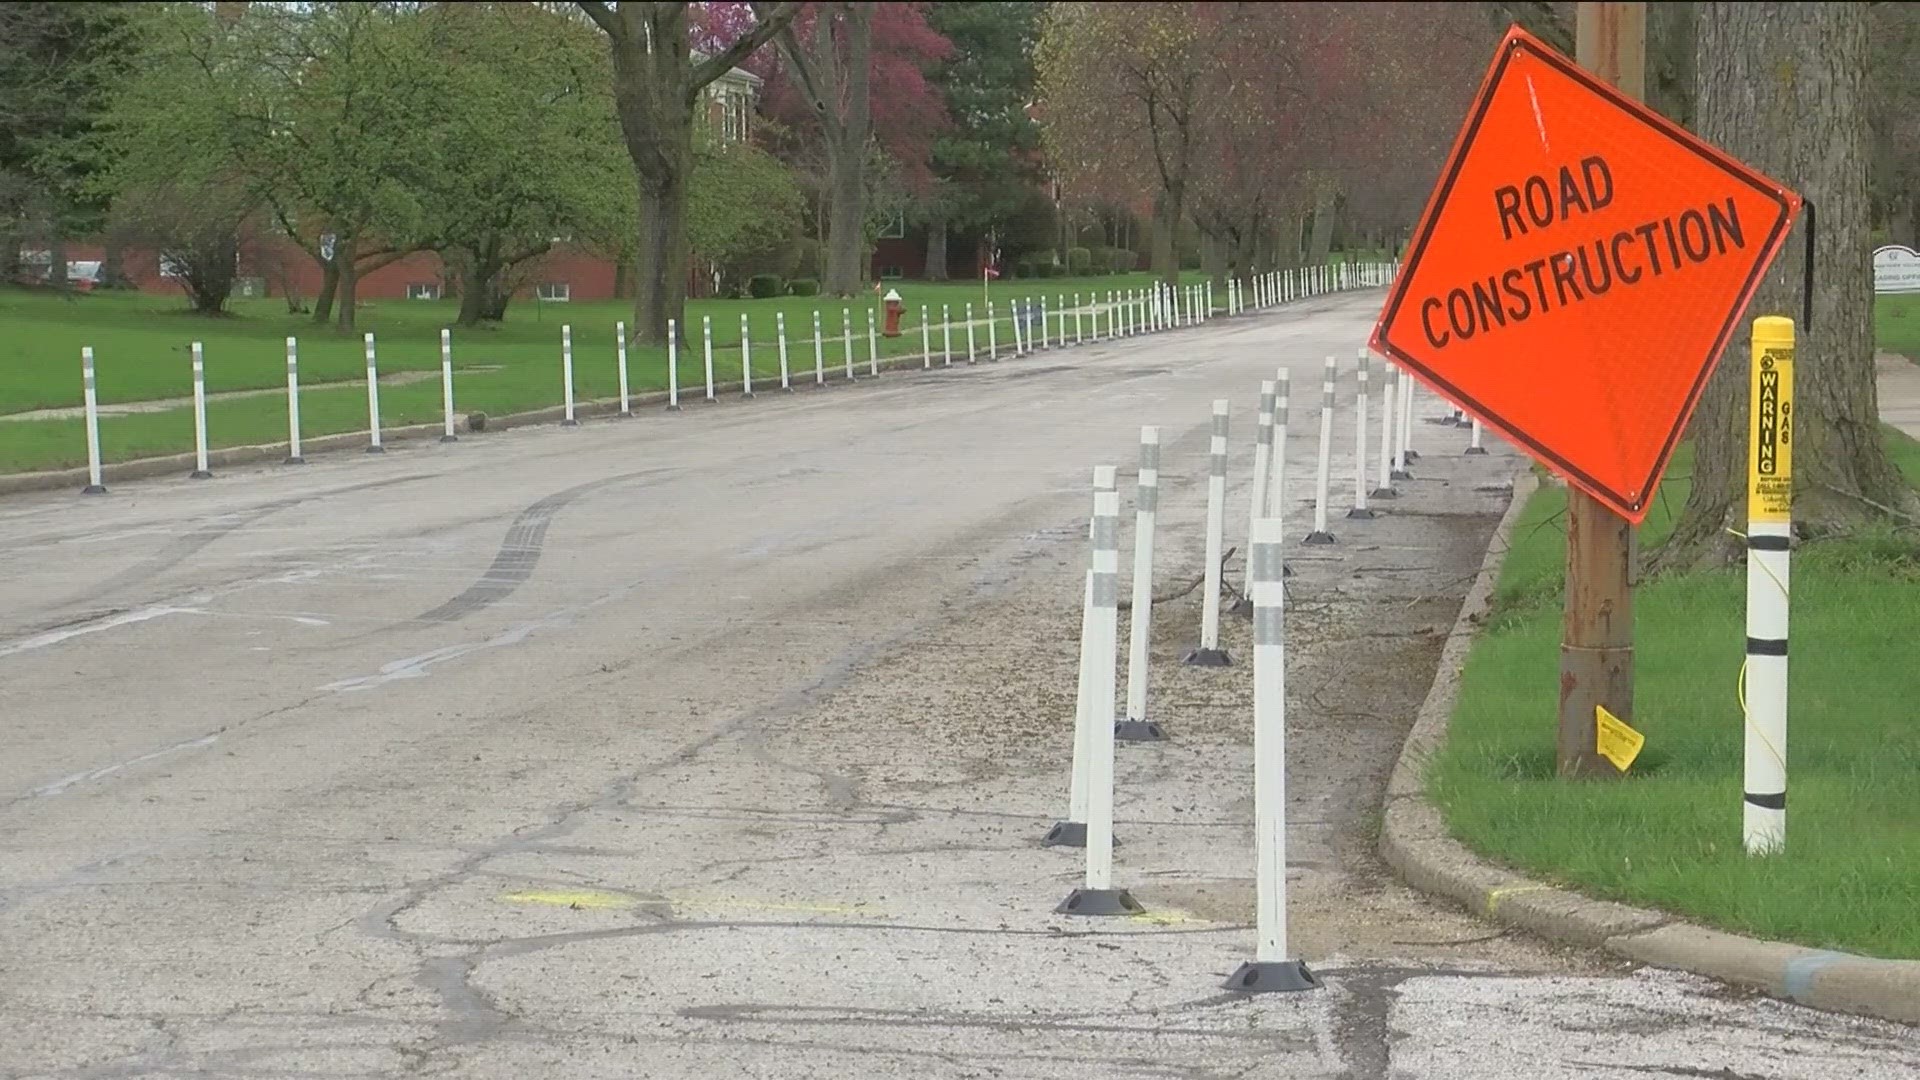 The city of Toledo added flexi-posts to narrow a west Toledo in hopes of reducing speeding. But residents say it has had an opposite effect.